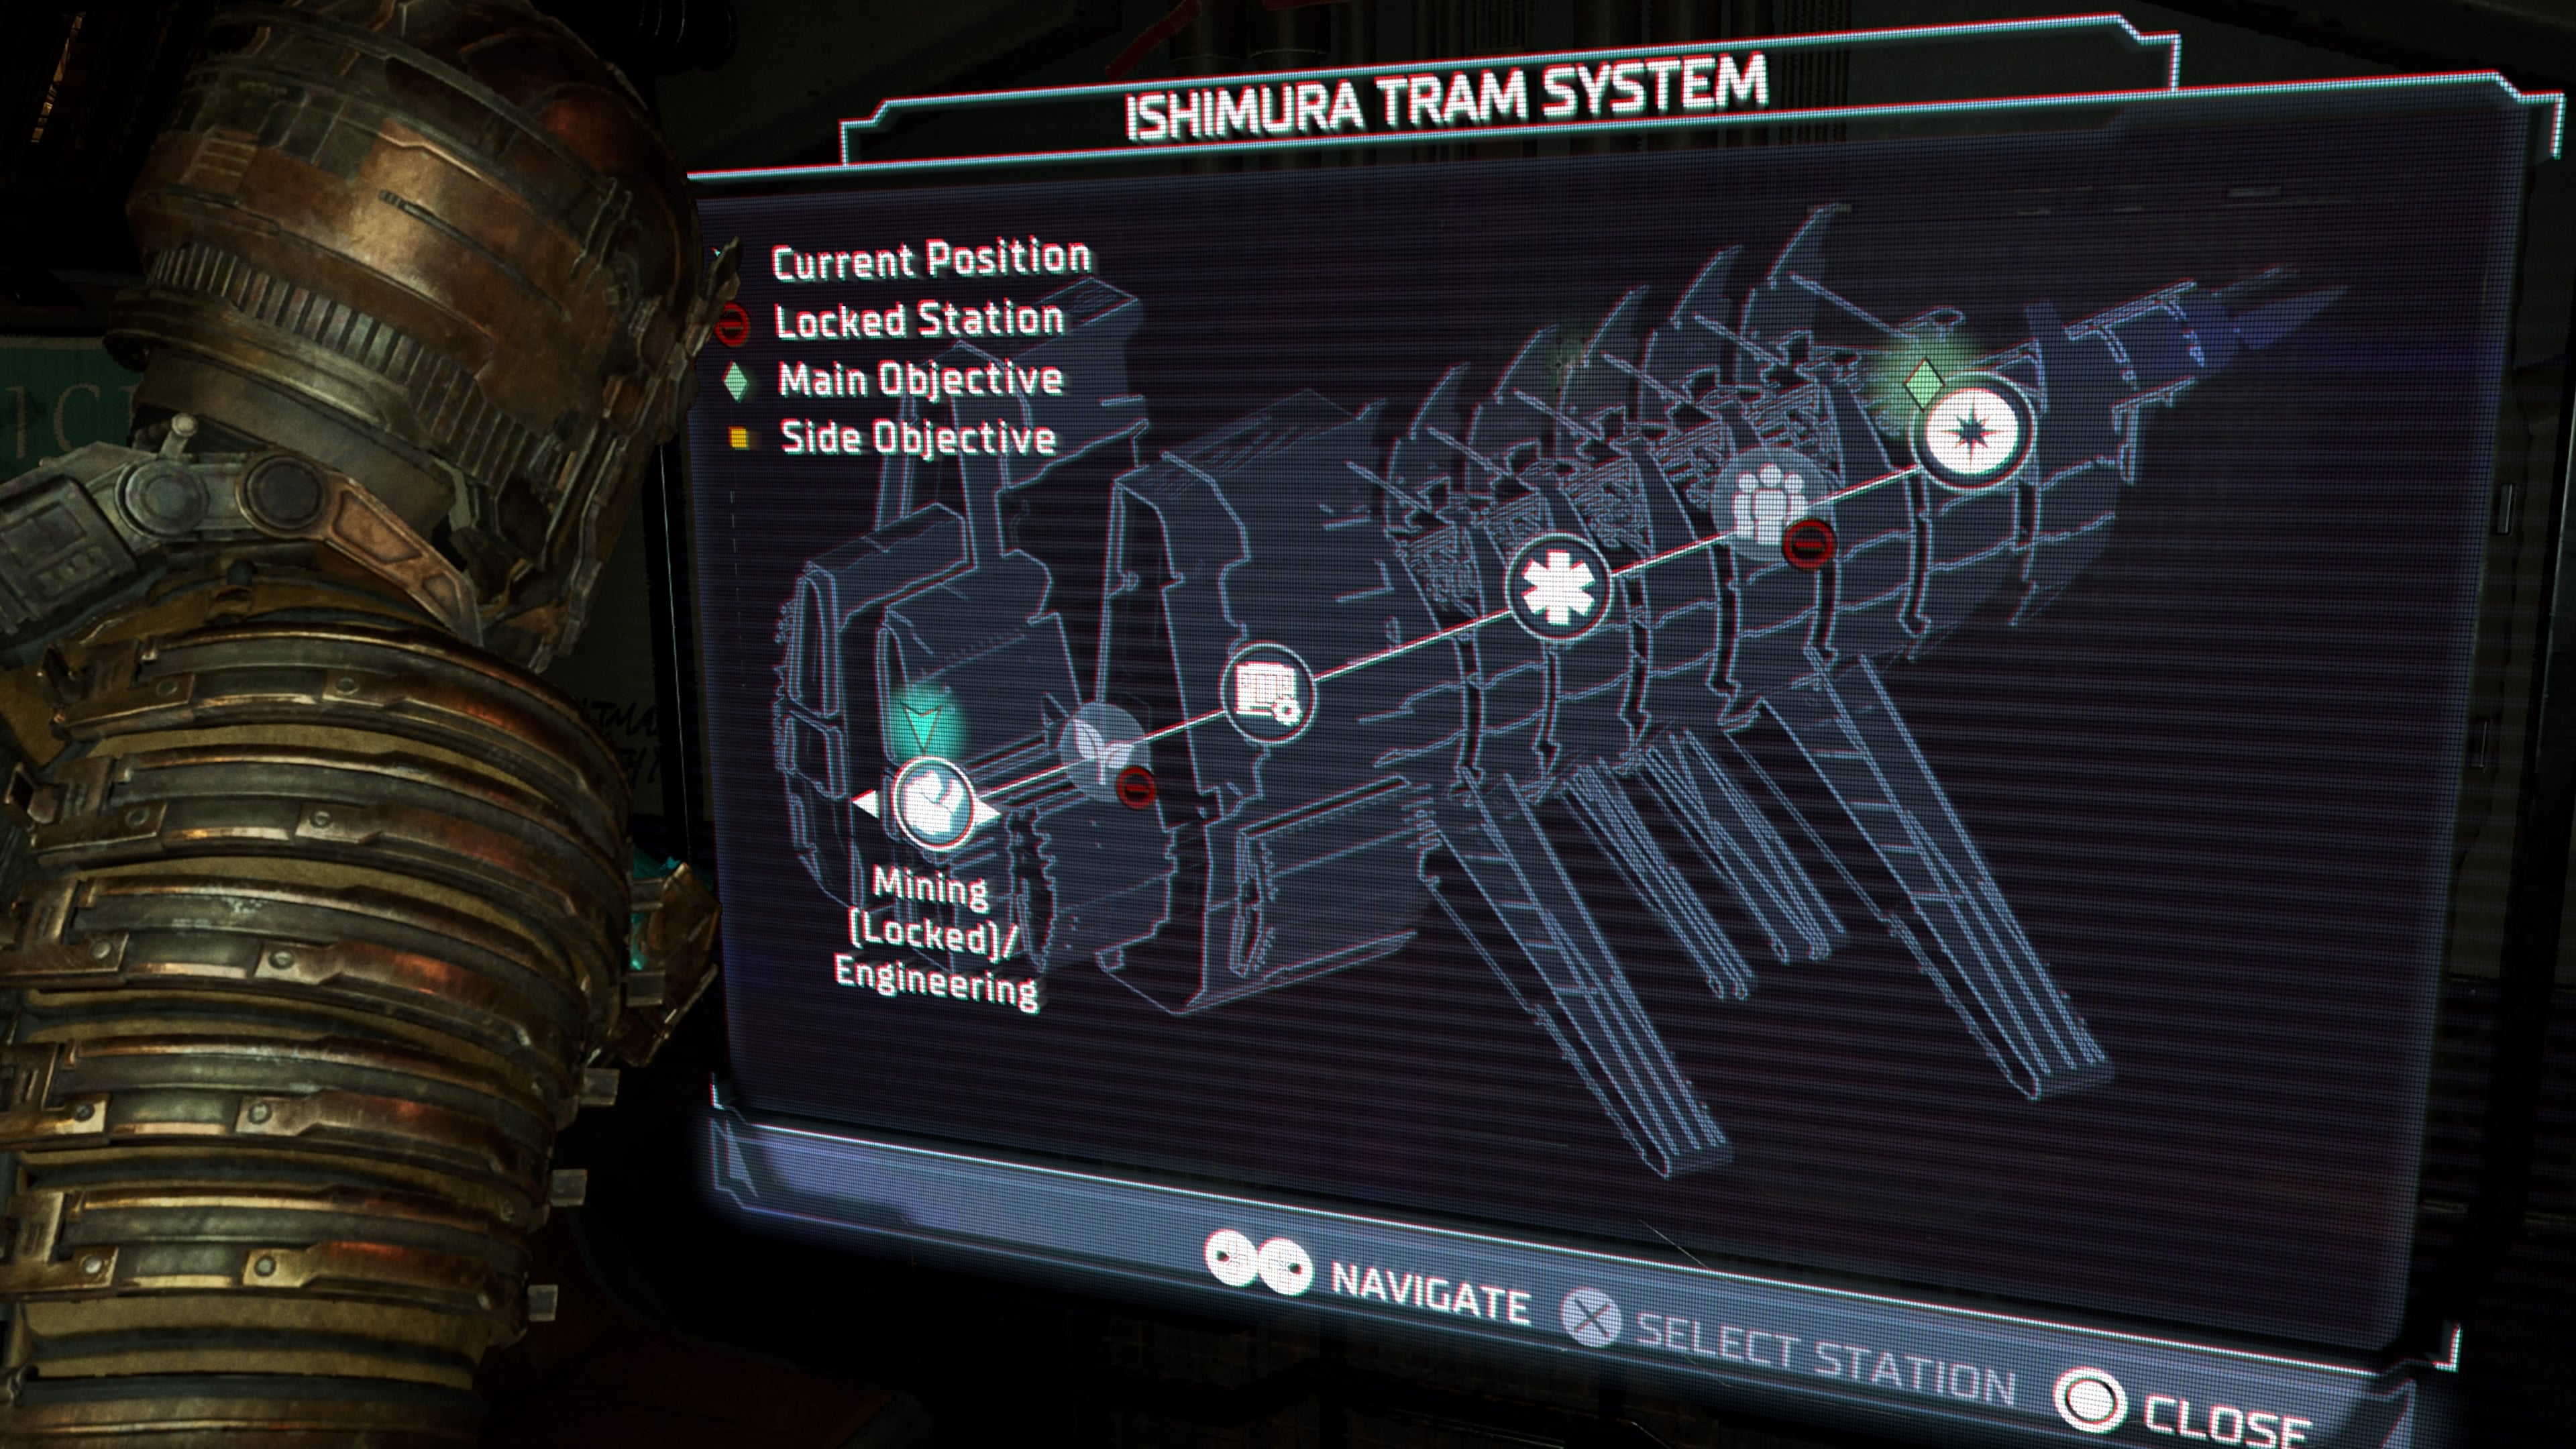 Dead Space remake review - looking at a map for the tram system